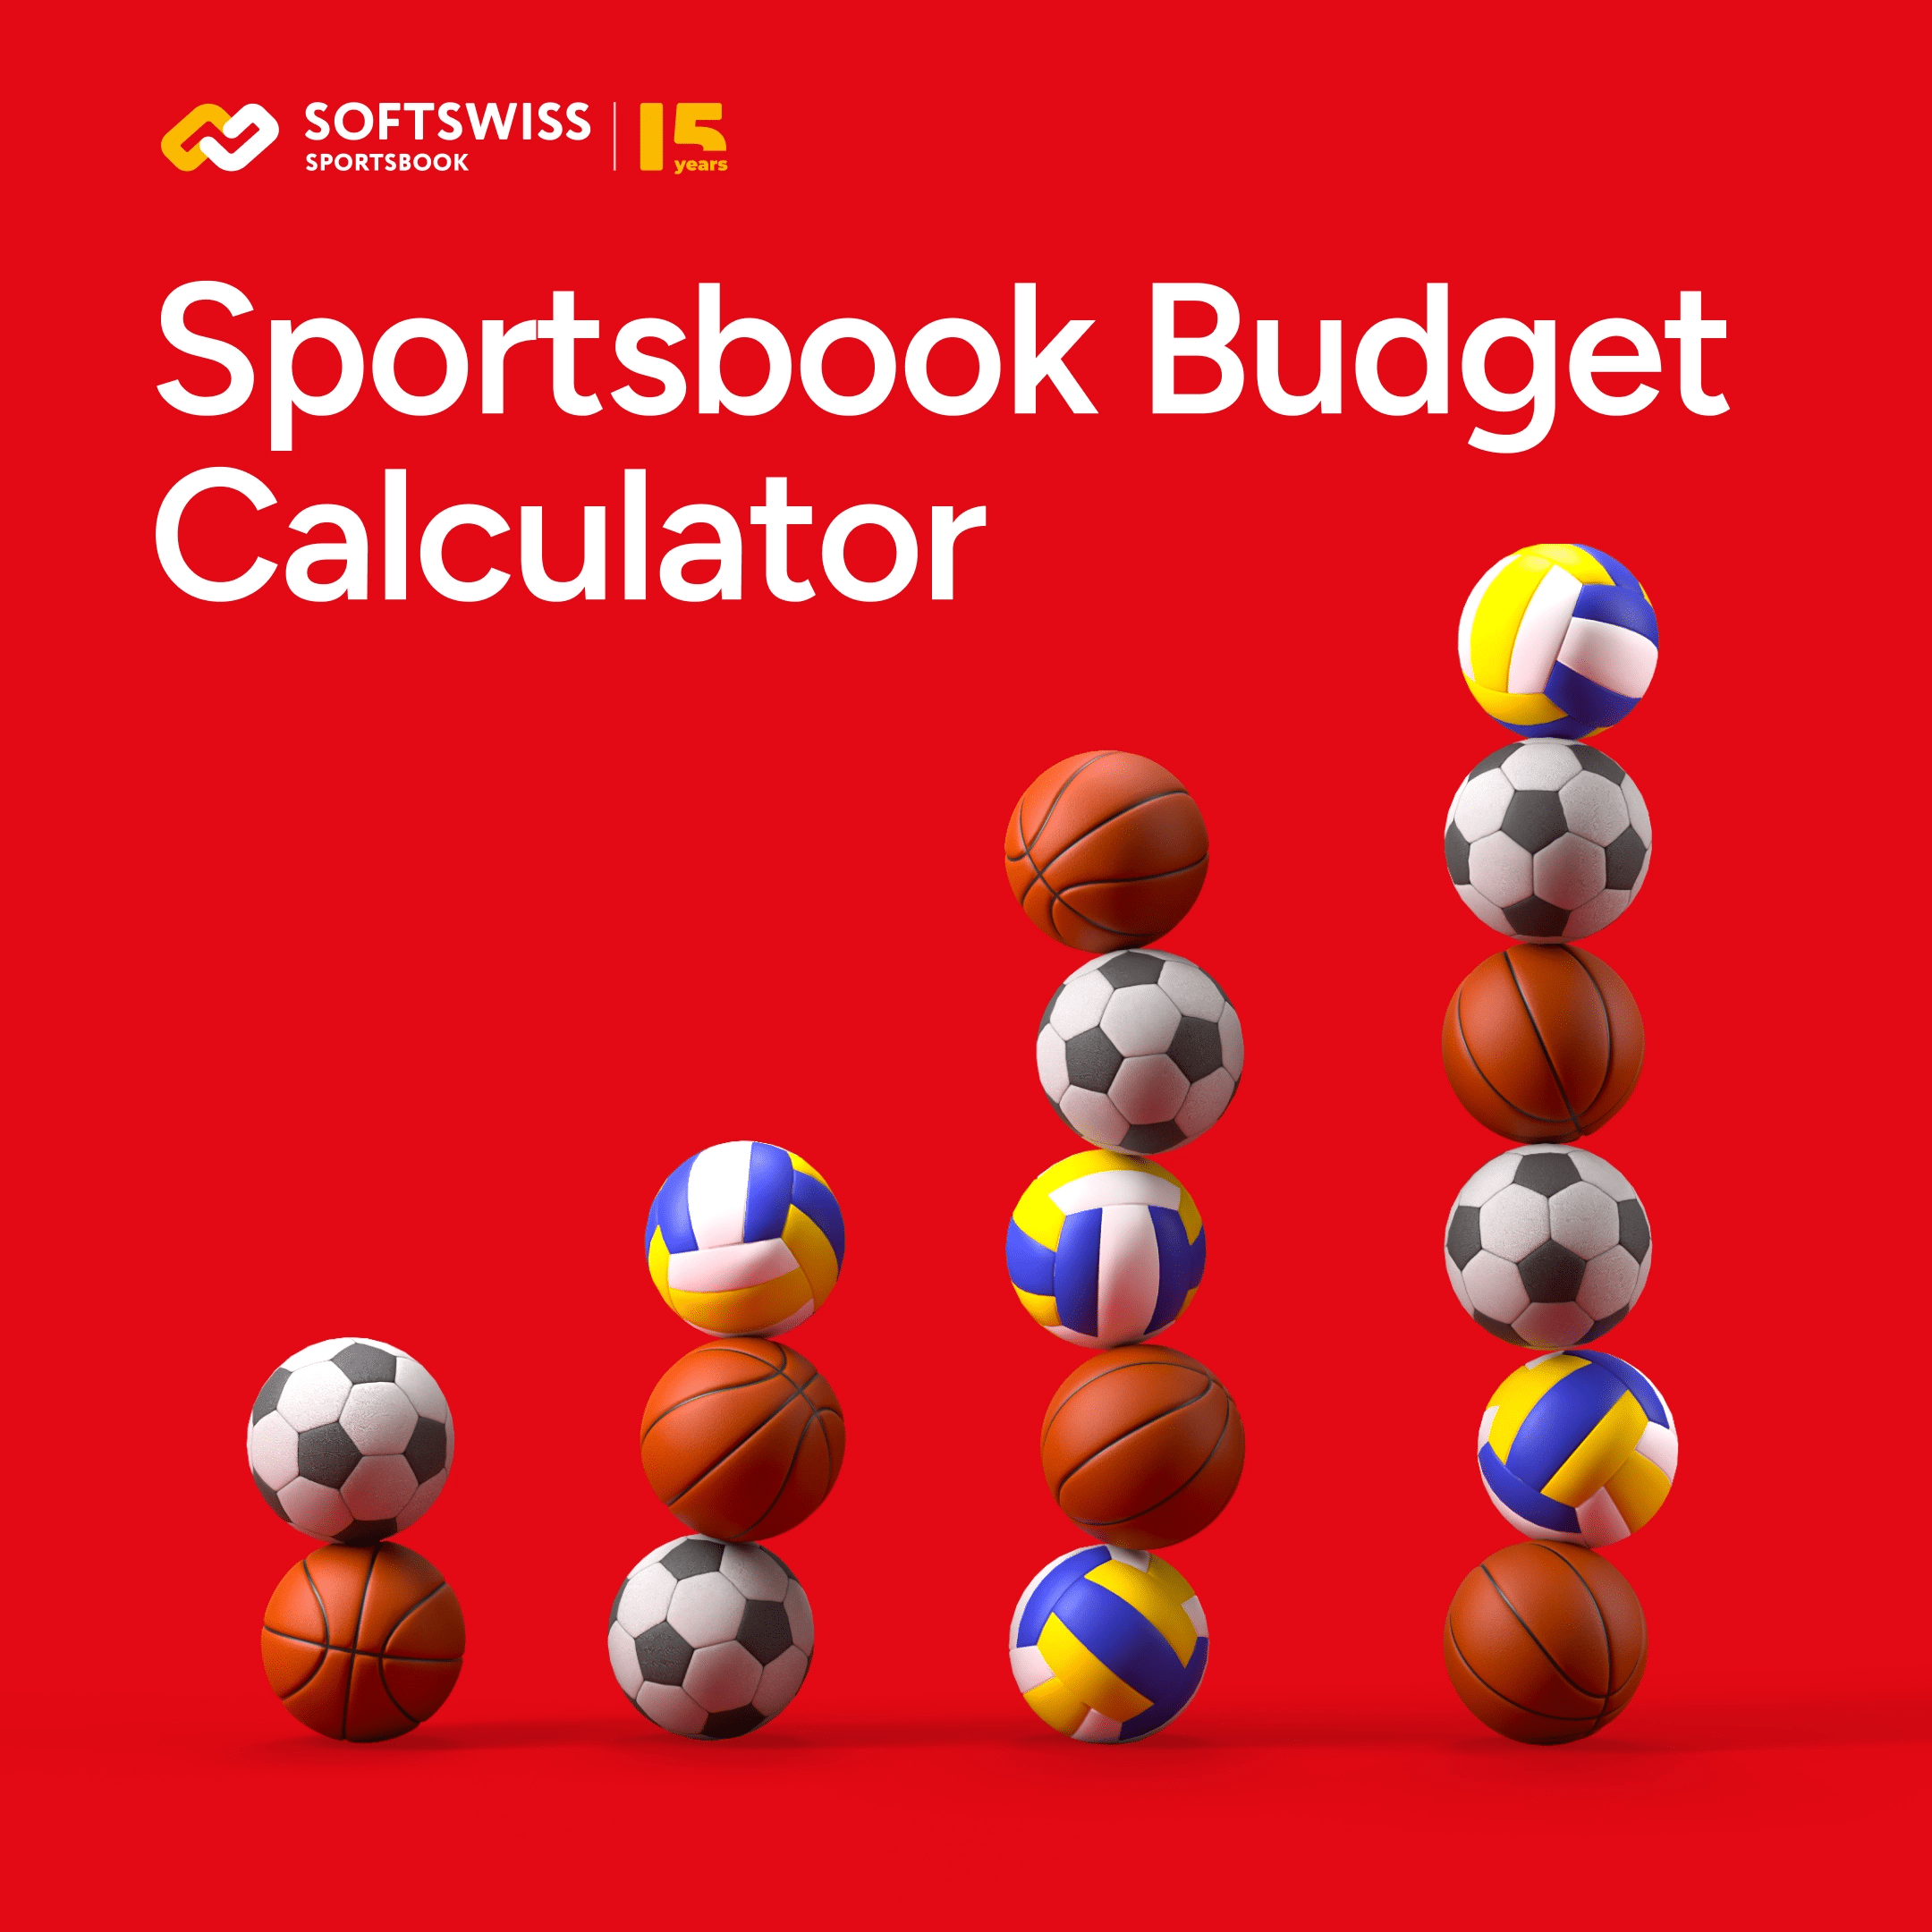 SOFTSWISS Releases Free Sportsbook Budget Calculator